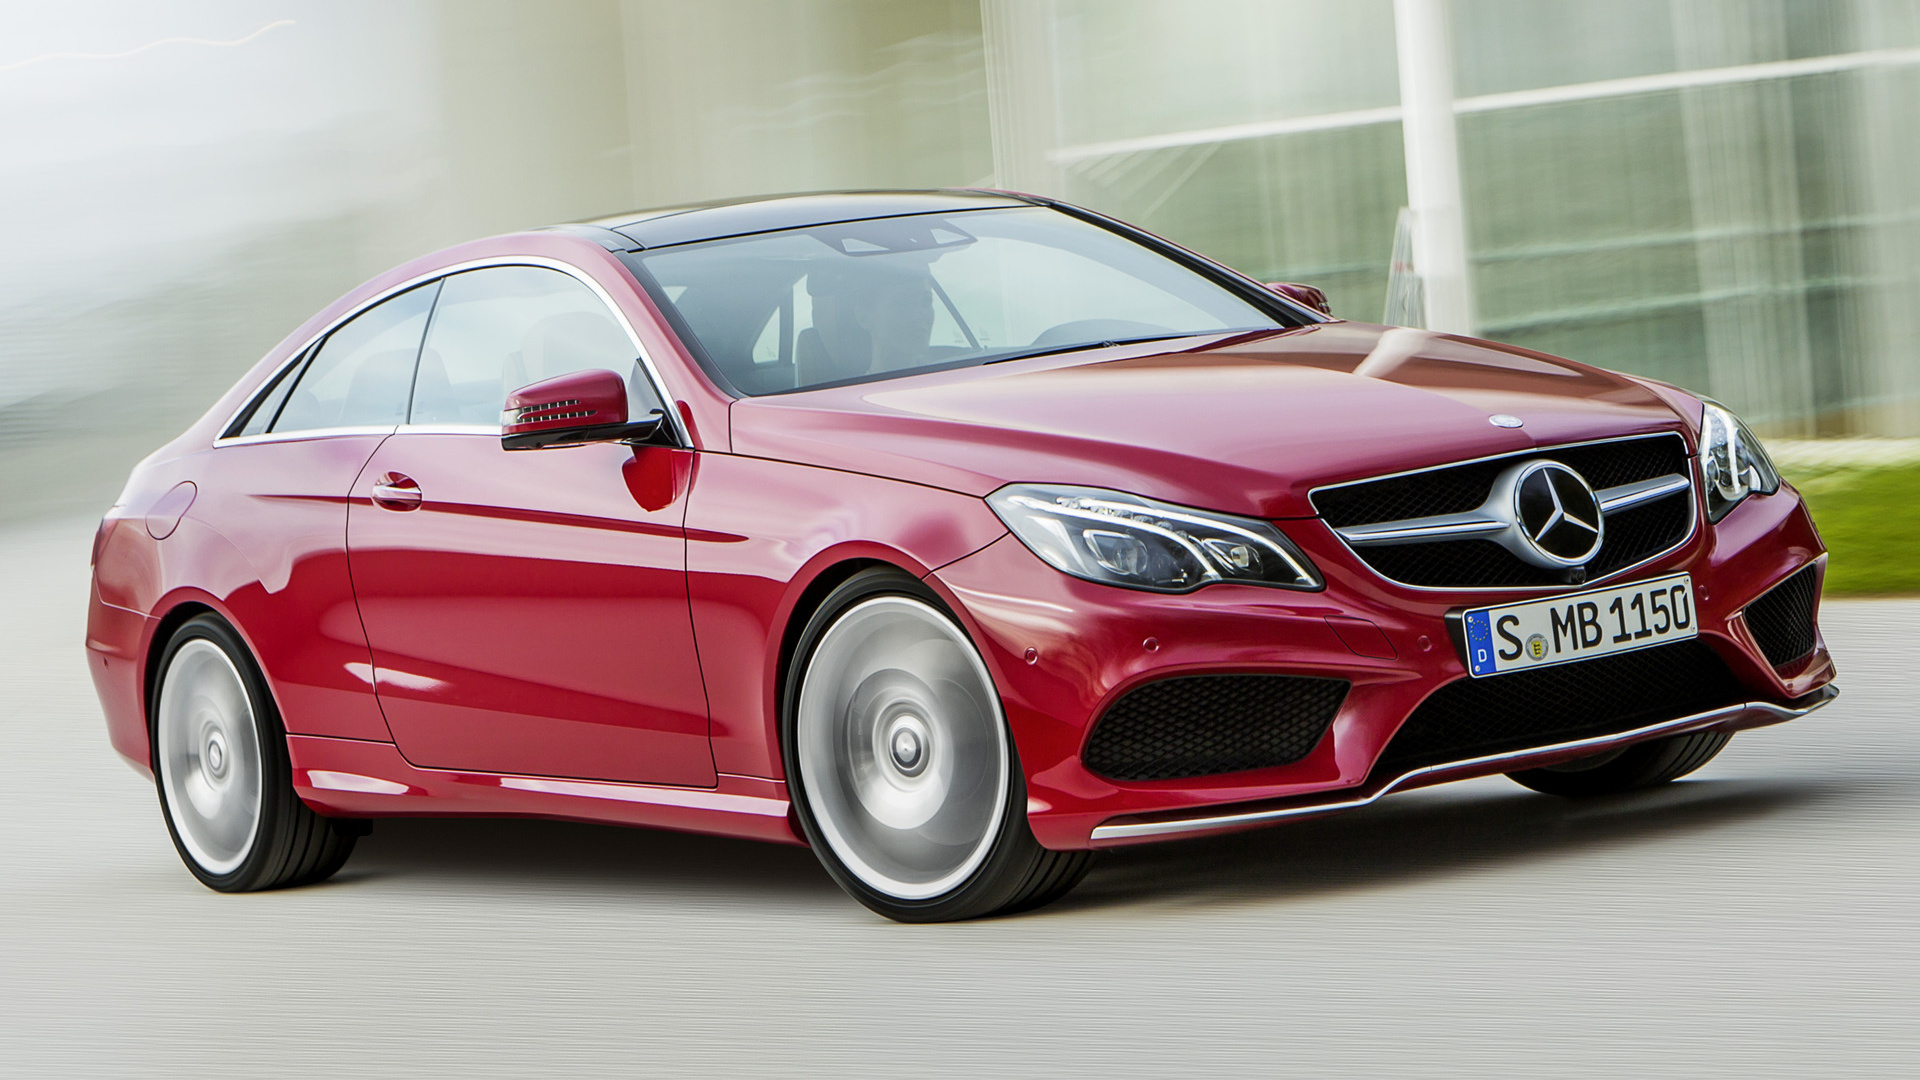 Mercedes-Benz E 500 Coupe Amg Styling Wallpapers